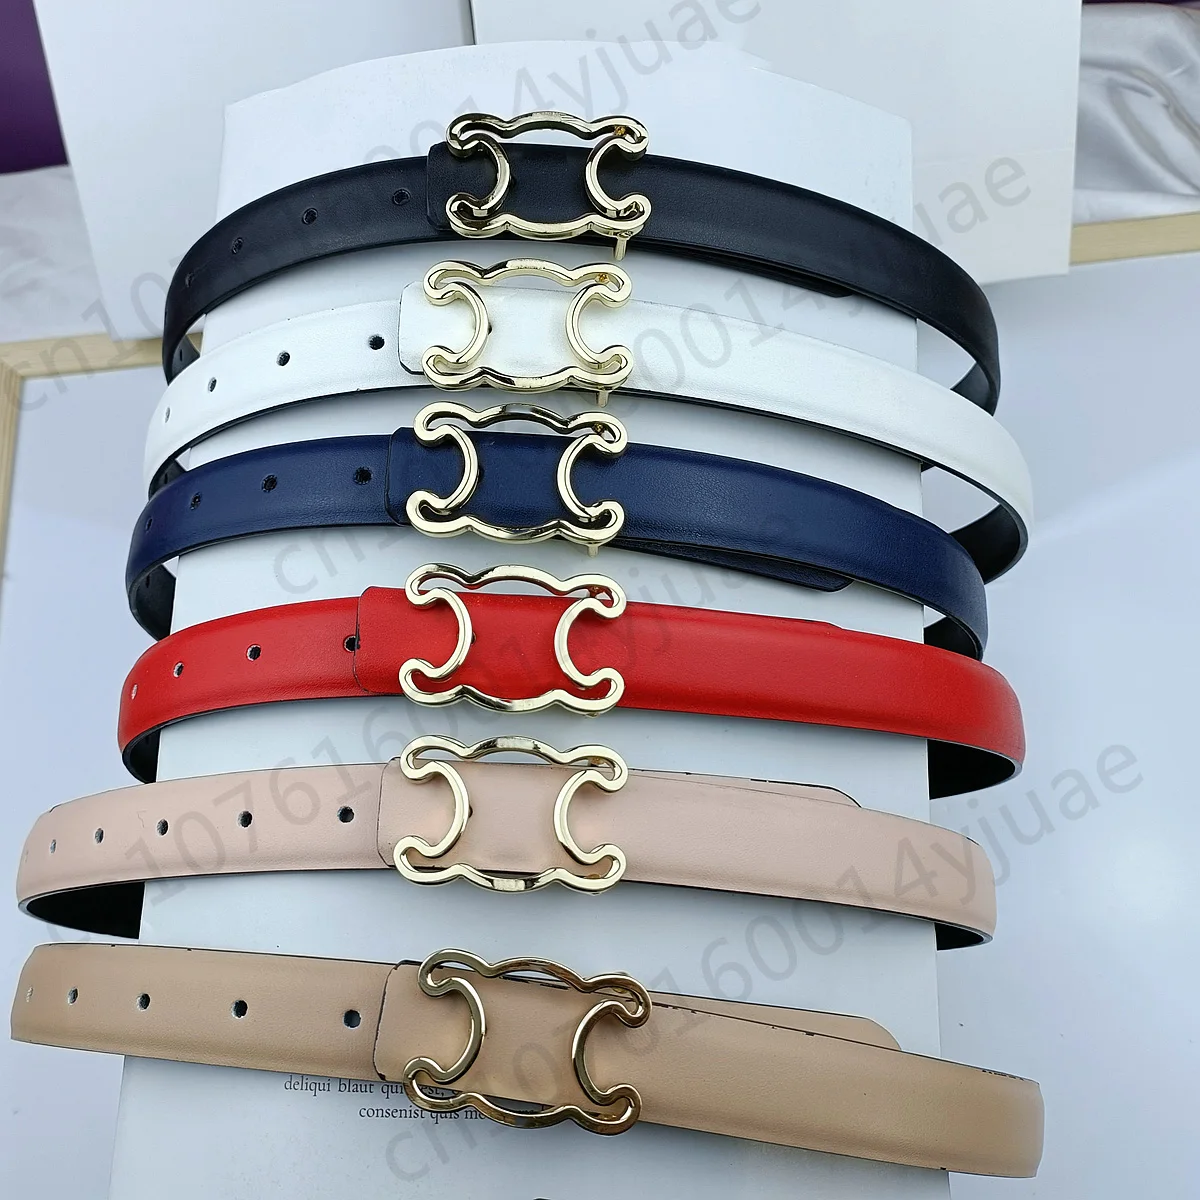 

2.5cm Woman Genuine Leather High Quality Cowhide Ladies Strap Luxury Fashion Women Girl Dress Jeans Waistband With Giftbox